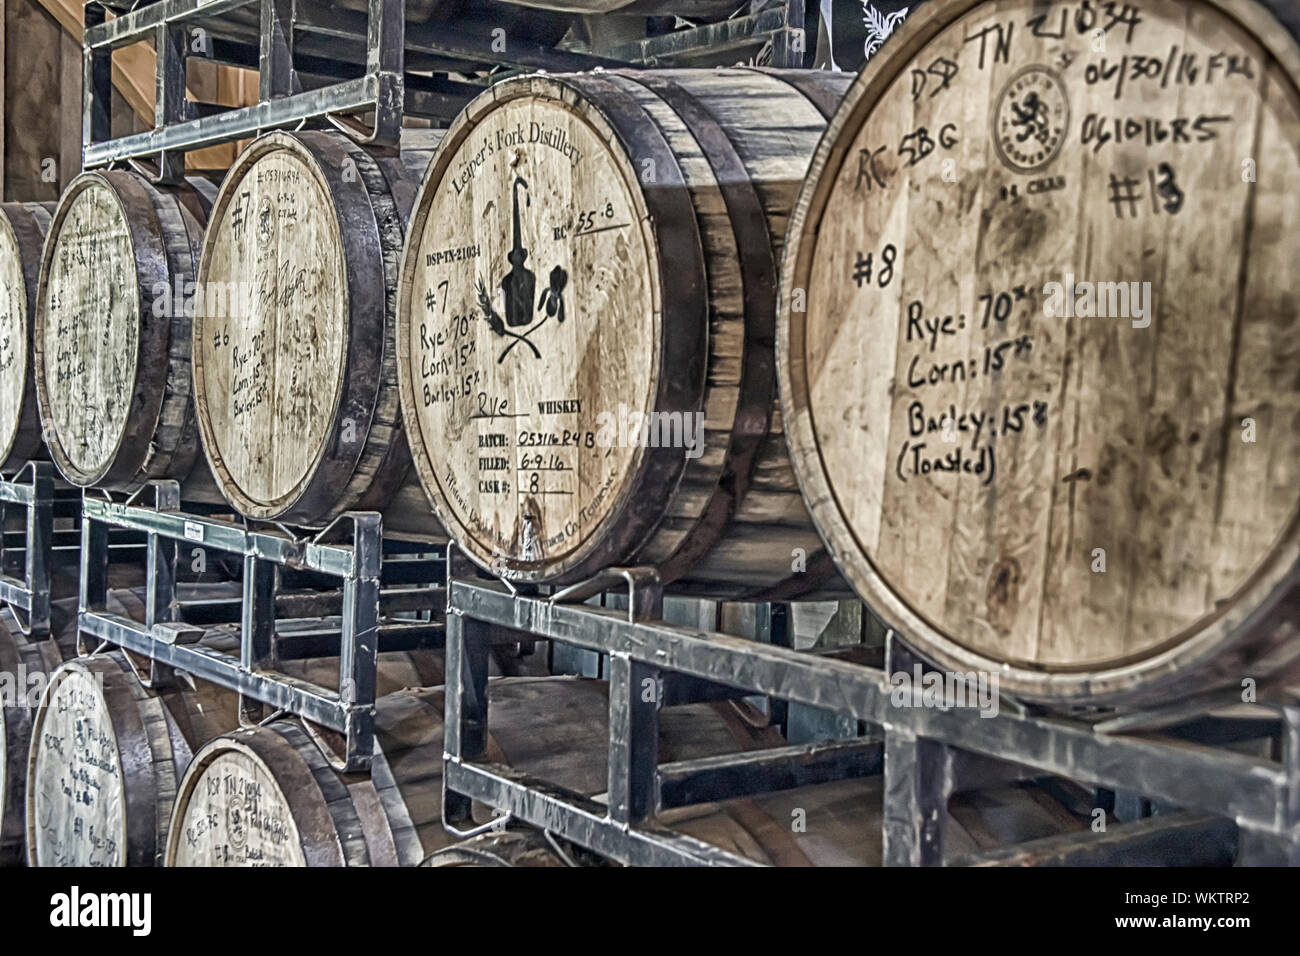 Leipers Fork, Tennessee - August 28, 2019 - Barrels aging in warehouse of Leiper's Fork Distilling Company. Stock Photo